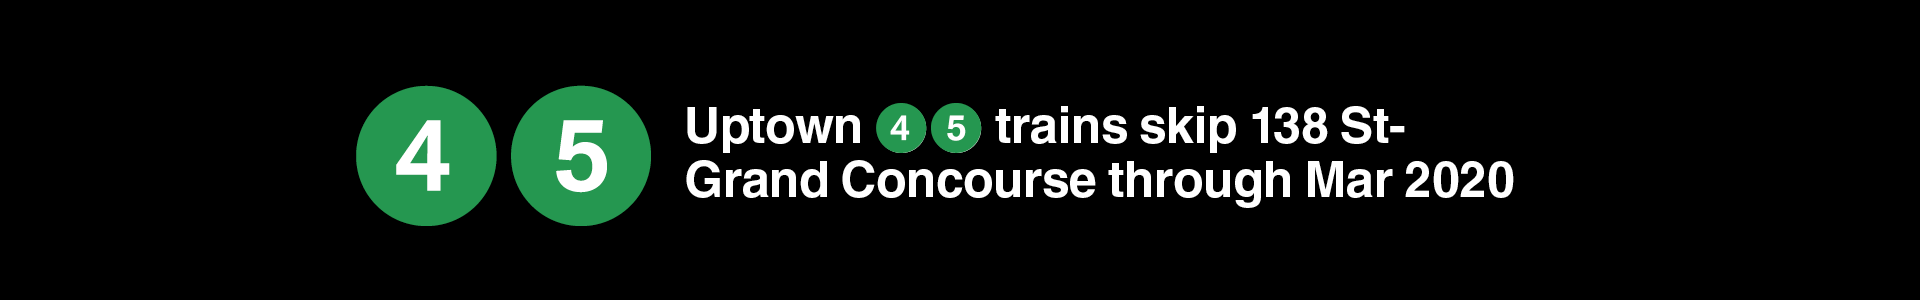 Uptown 4 and 5 trains skip 138 St-Grand Concourse